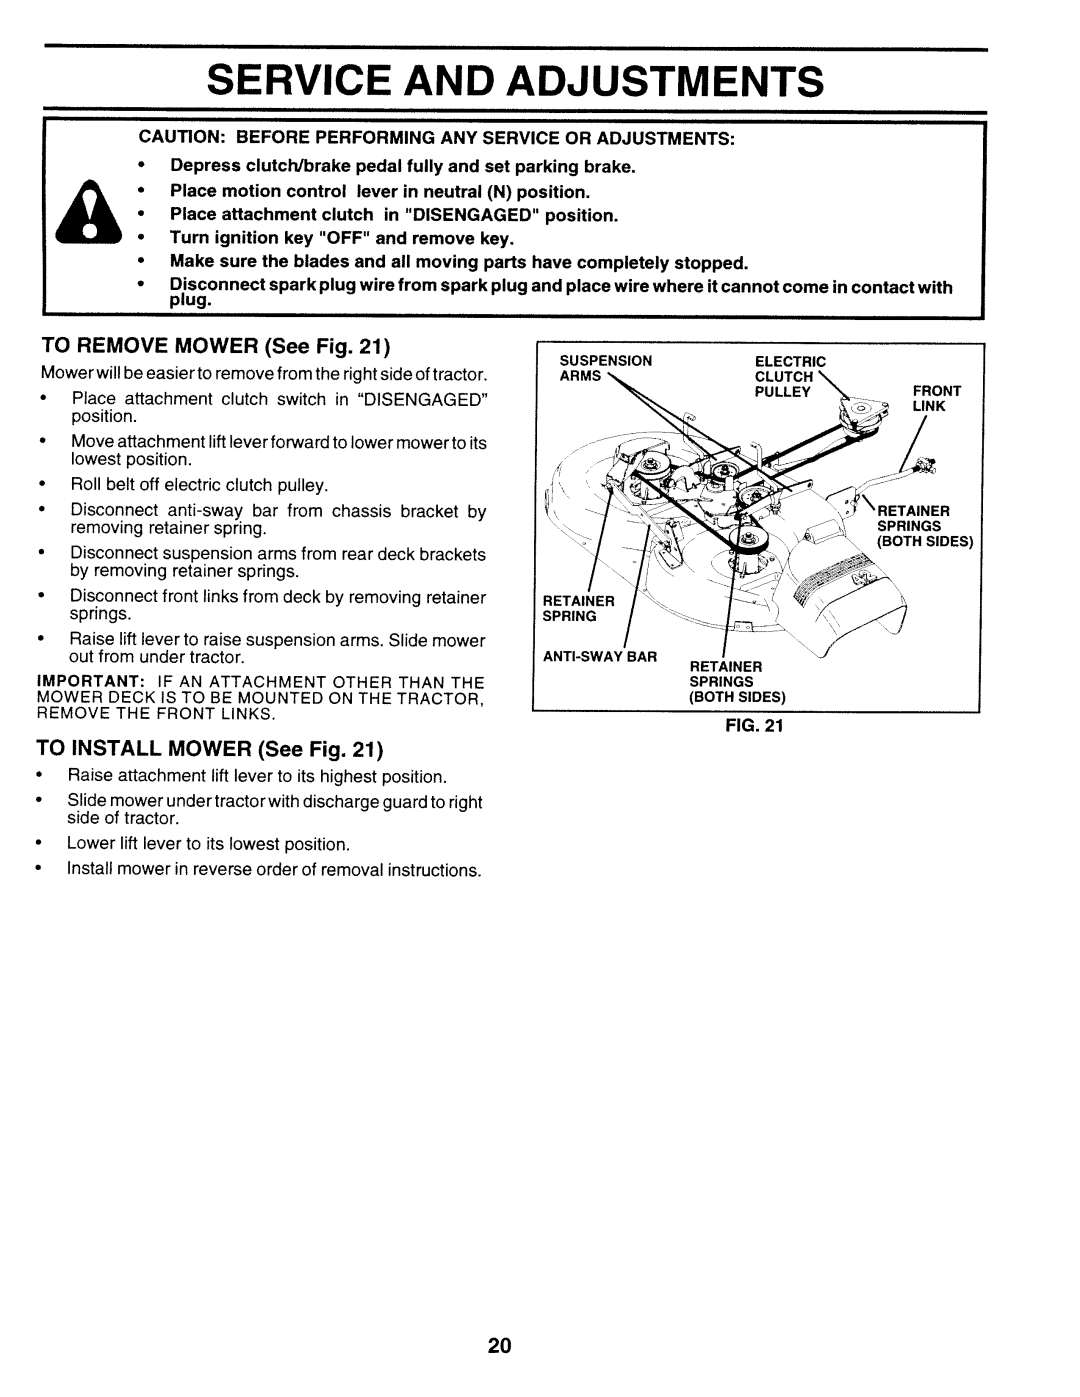 Sears 917.25271 owner manual Service And Adjustments, TO REMOVE MOWER See Fig, TO INSTALL MOWER See Fig 